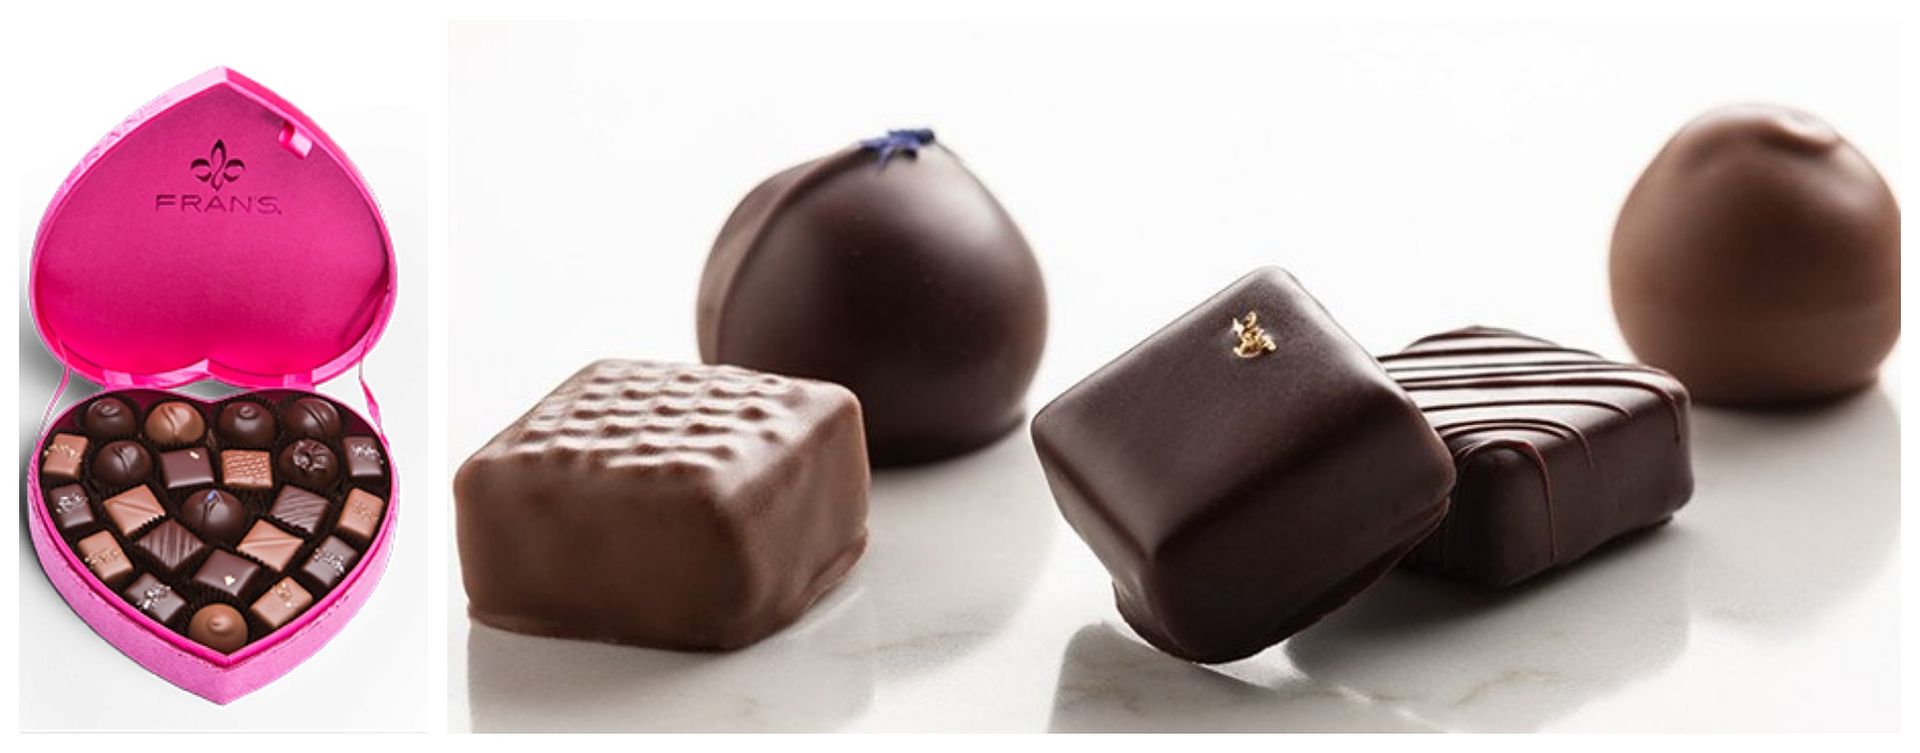 Fancy chocolates for Valentine's Day: Fran's Chocolates Truffle and Caramel Heart.